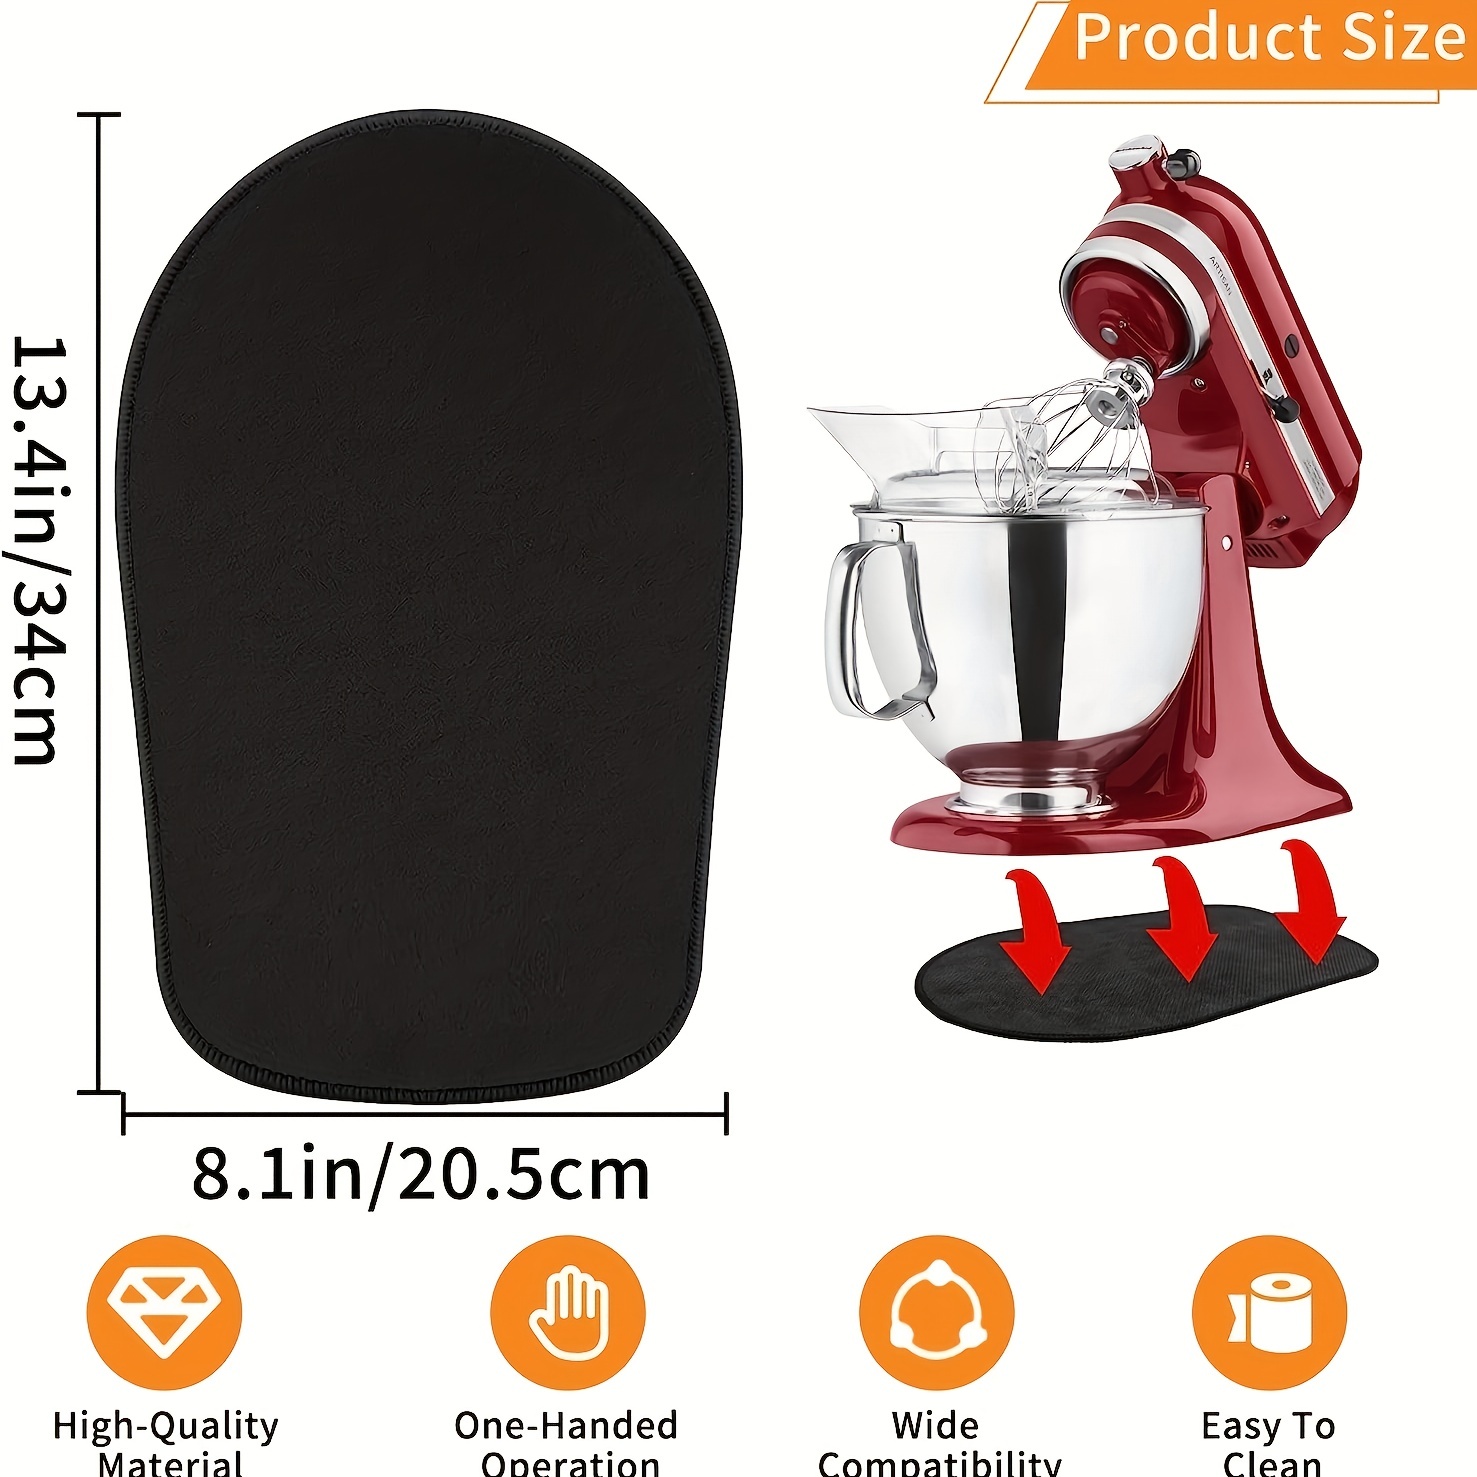 Kitchenaid Stand Mixer Slider Mat - Easy Appliance Mover And Sliding Pad  For Tilt-head Mixers - Protects Countertops And Floors - Temu United Arab  Emirates